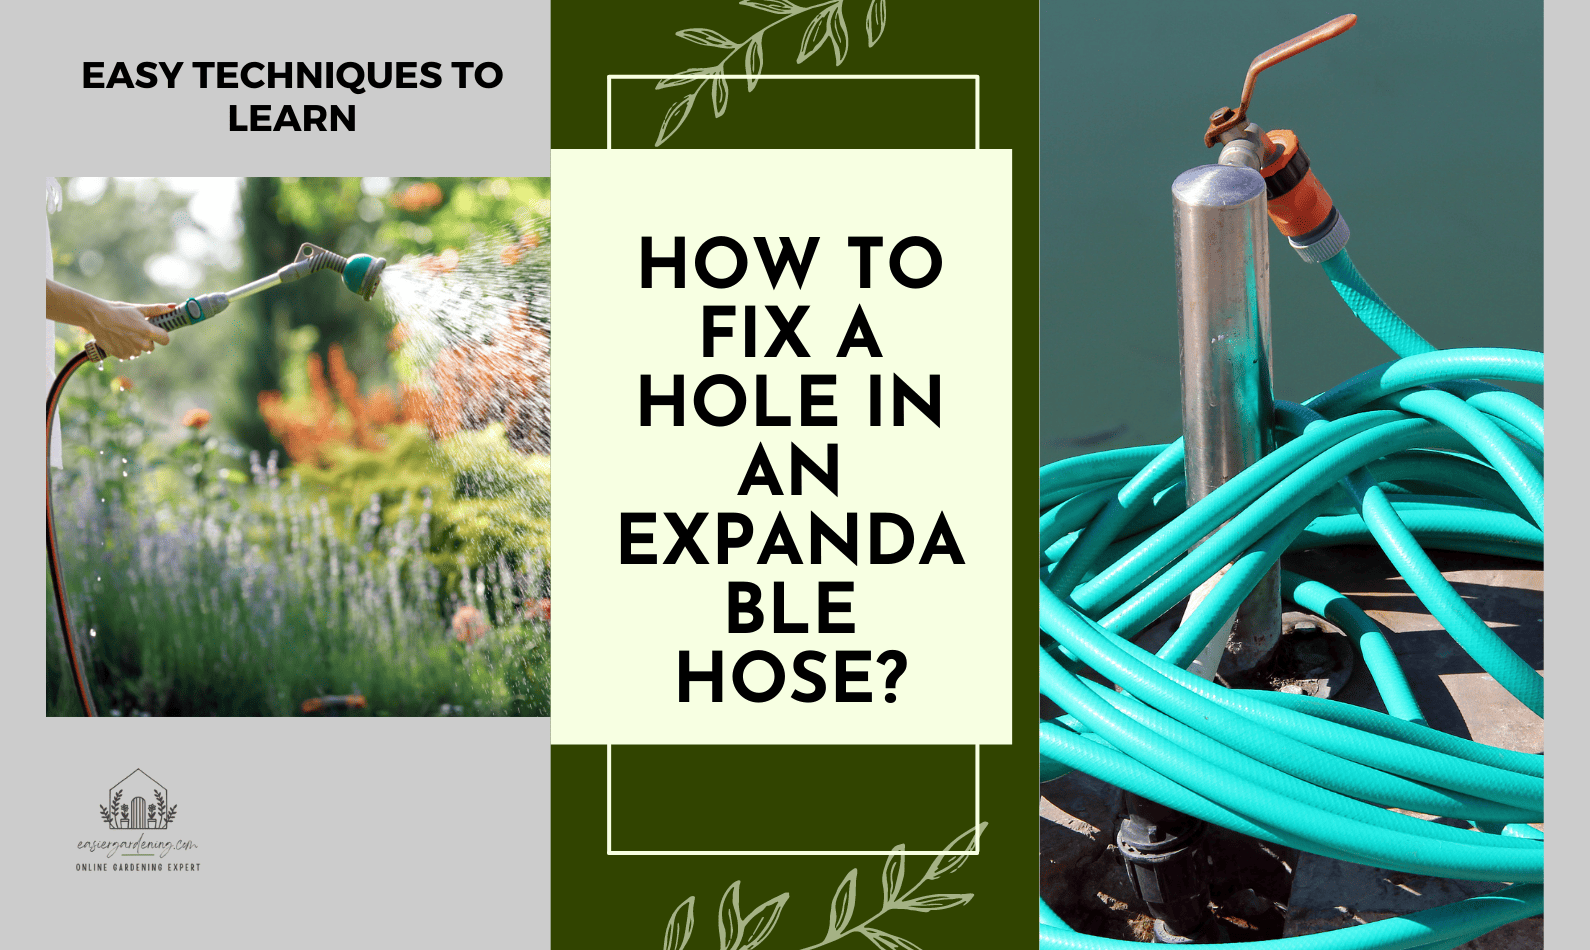 How to Fix a Hole in an Expandable Hose?